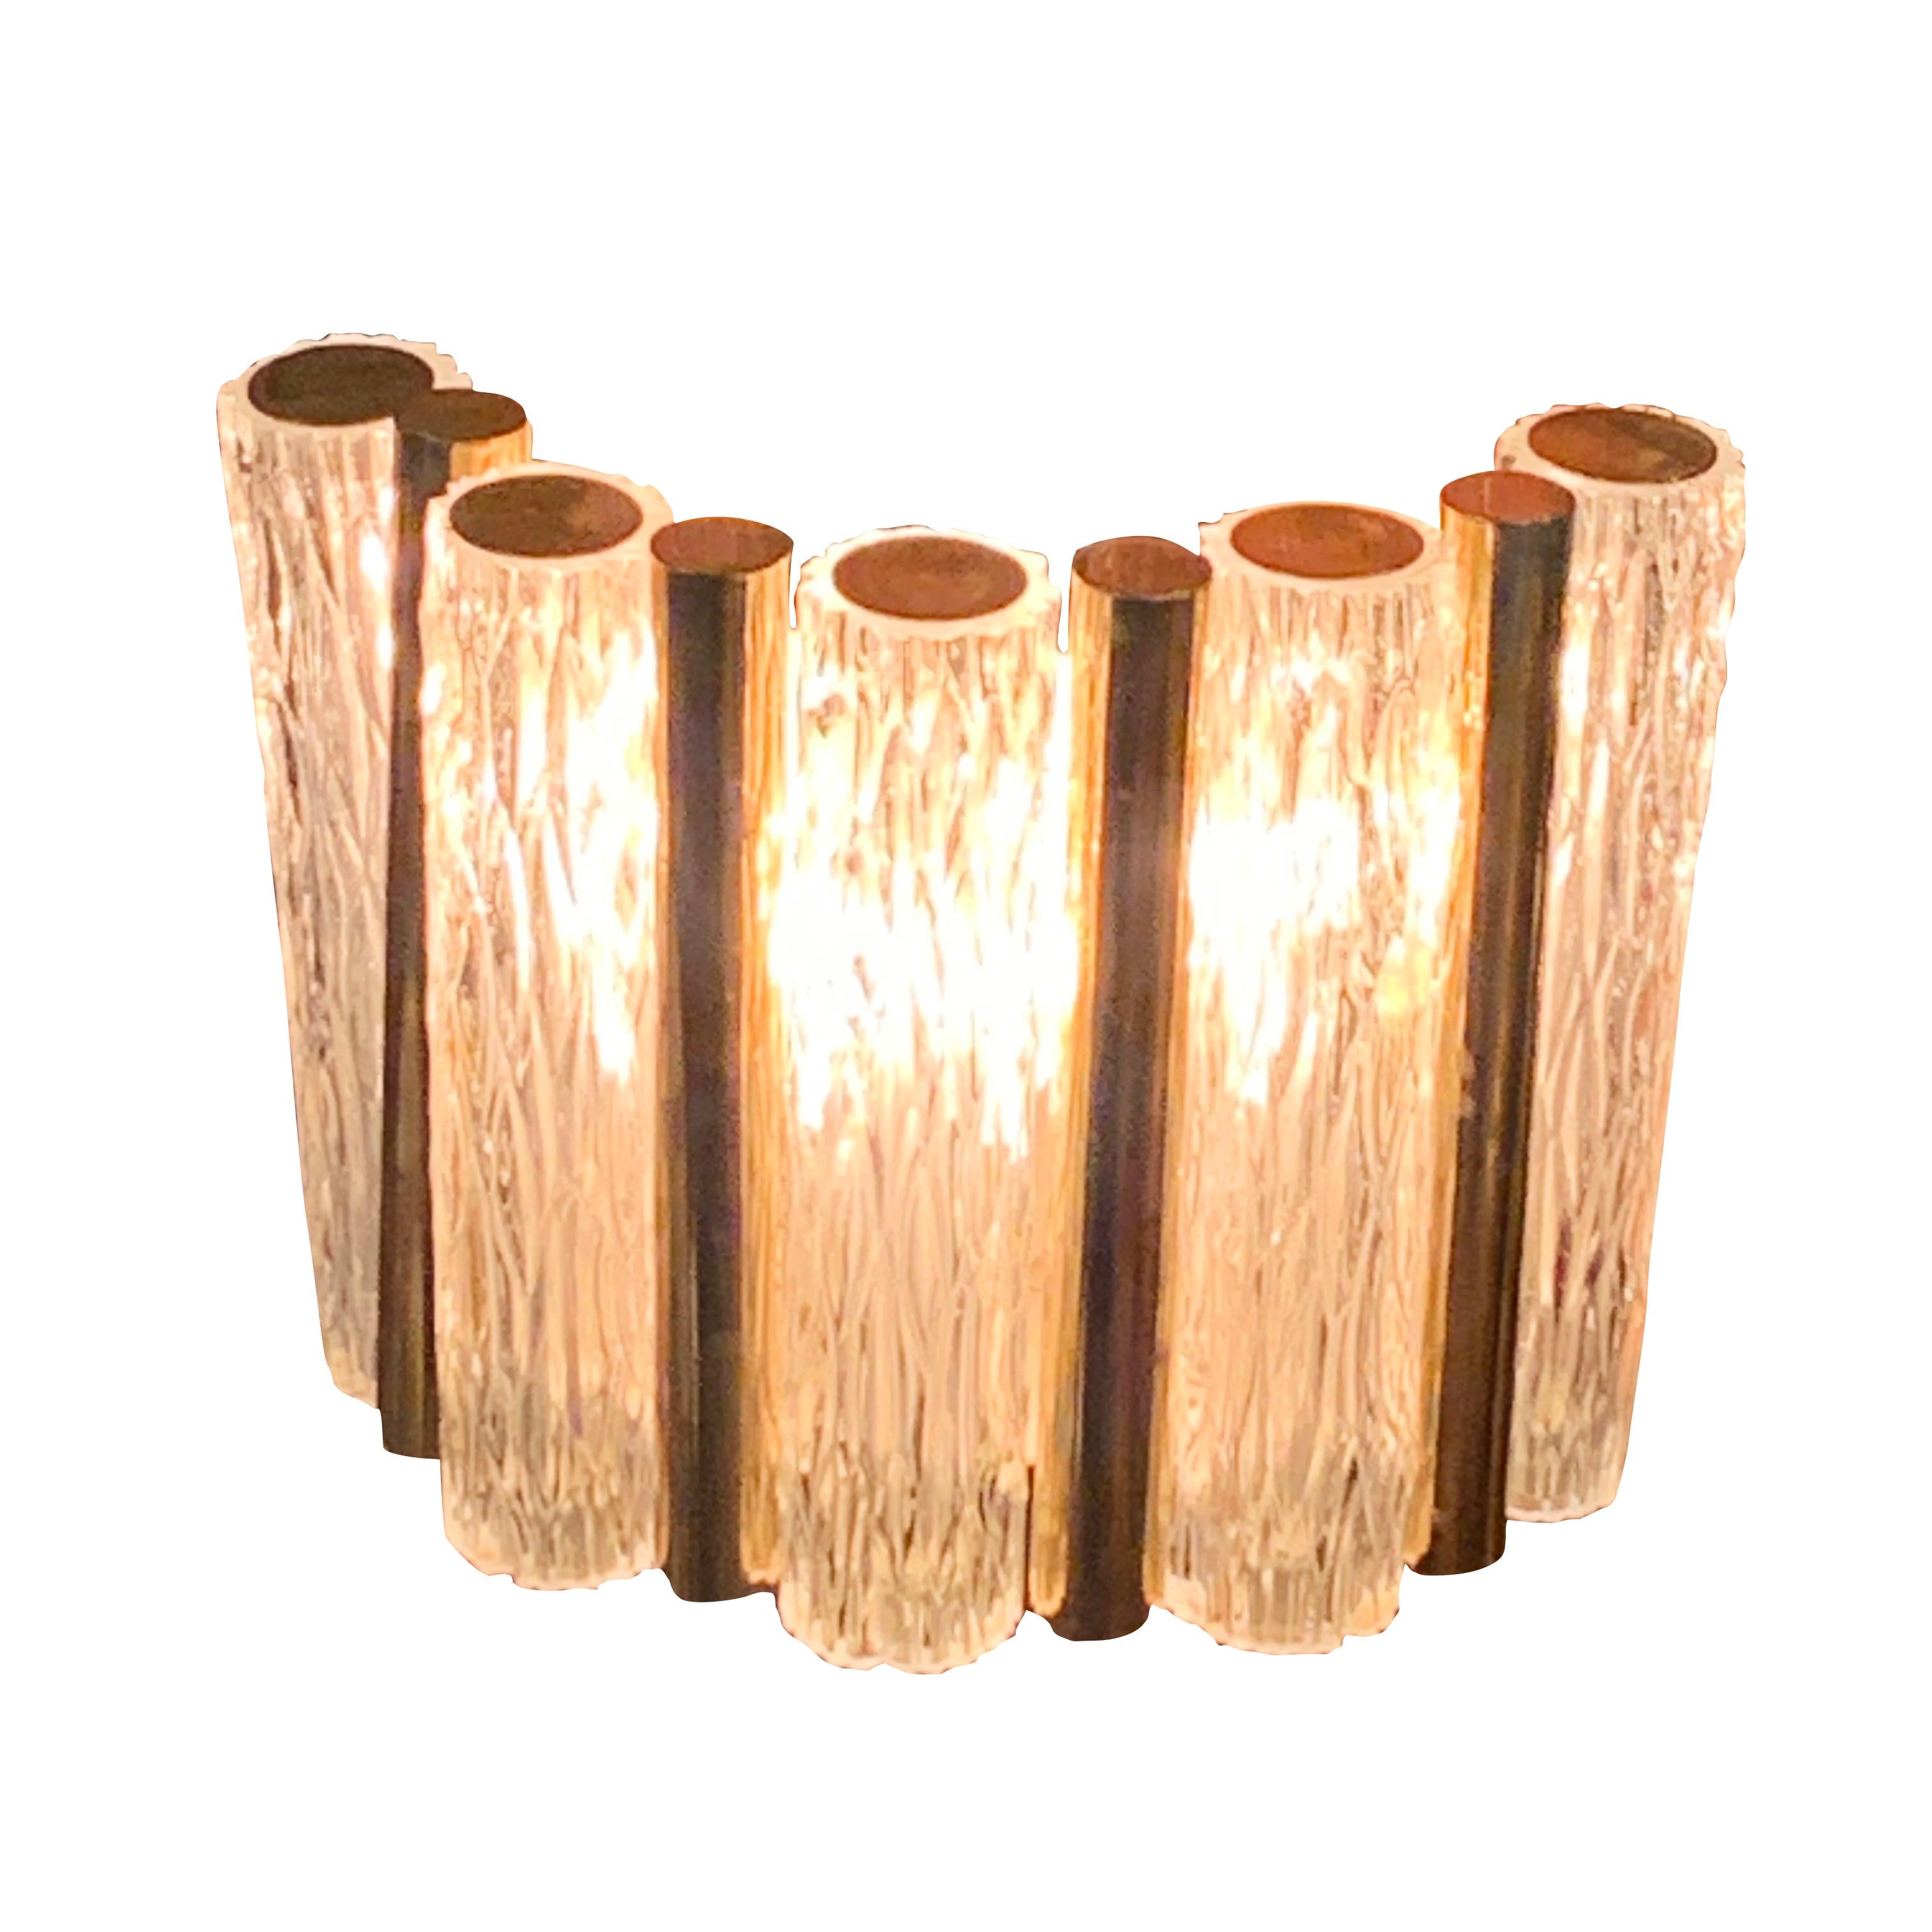 Midcentury French pair of textured glass sconces with bronze trim details.
Five textured glass tubes connected with bronze trim form a half moon shape.
Newly rewired.
Single regular socket with a small bulb.
 